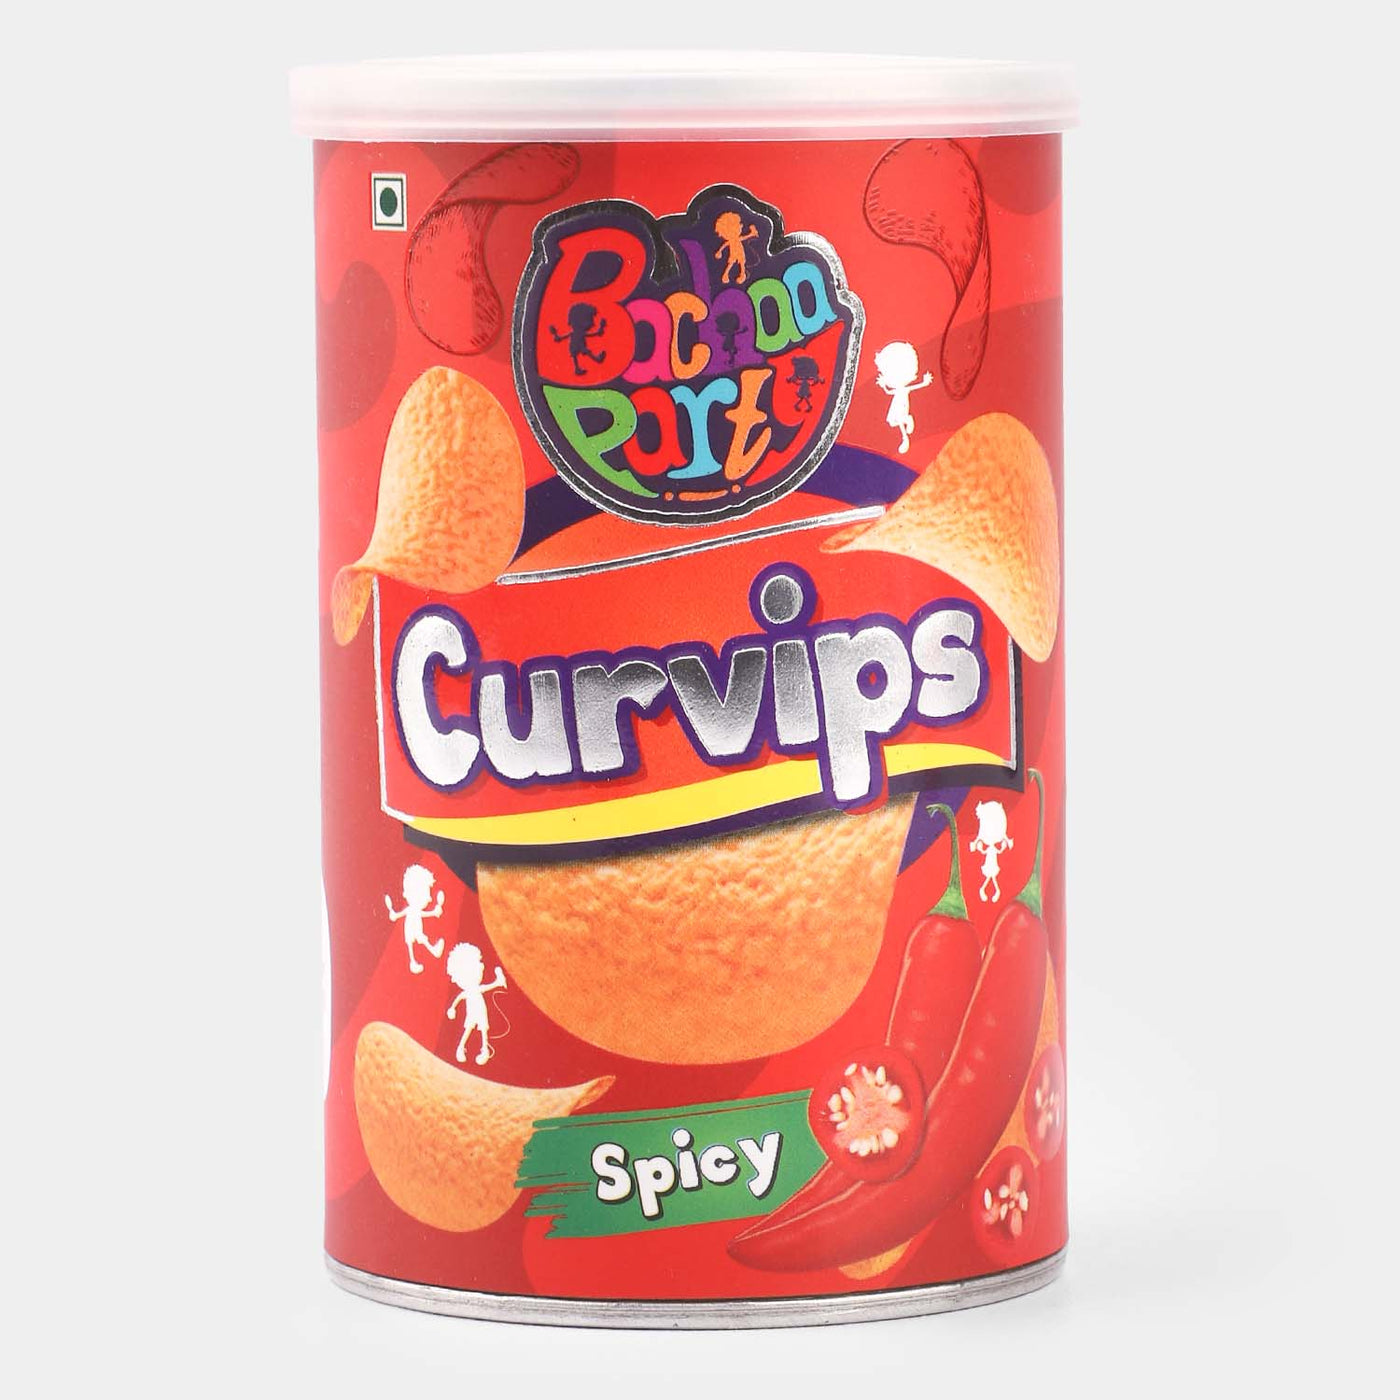 Bachaa Party Curvips Spicy Potato Chips